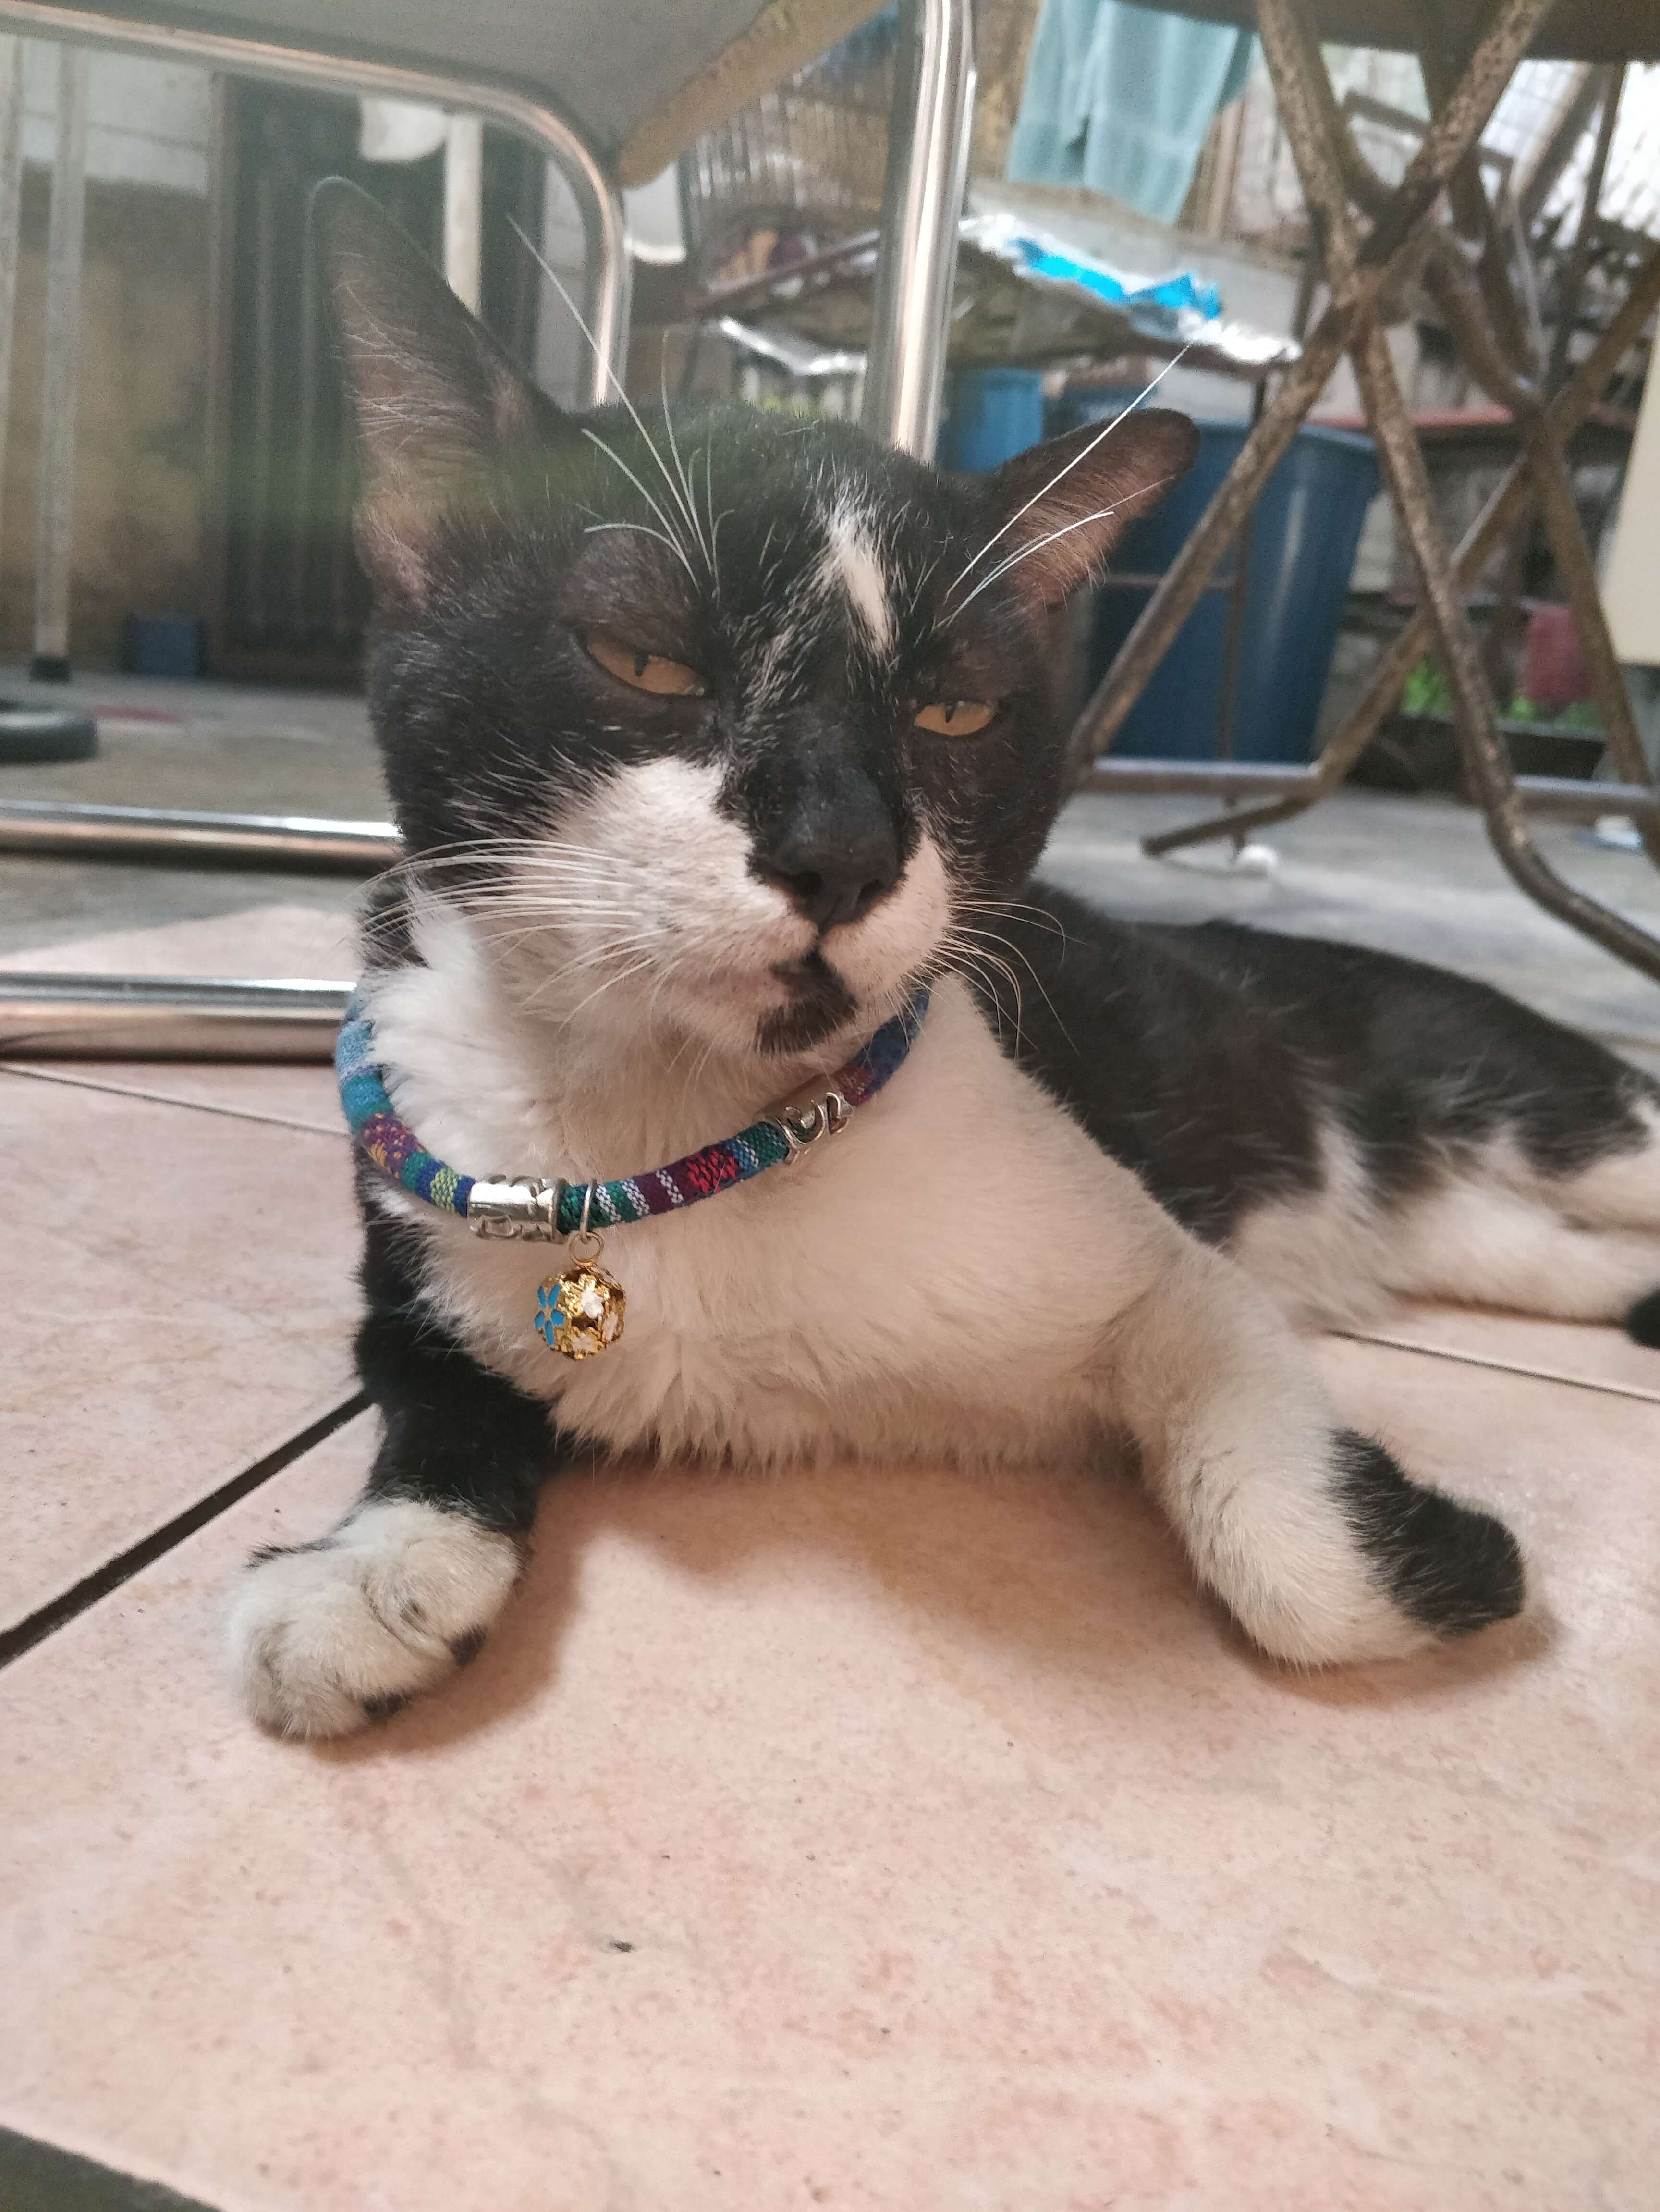 Picture of Chipiski, a mostly-black partly-white cat resting on the floor, wearing a fancy necklace from nowhere, looking into the camera